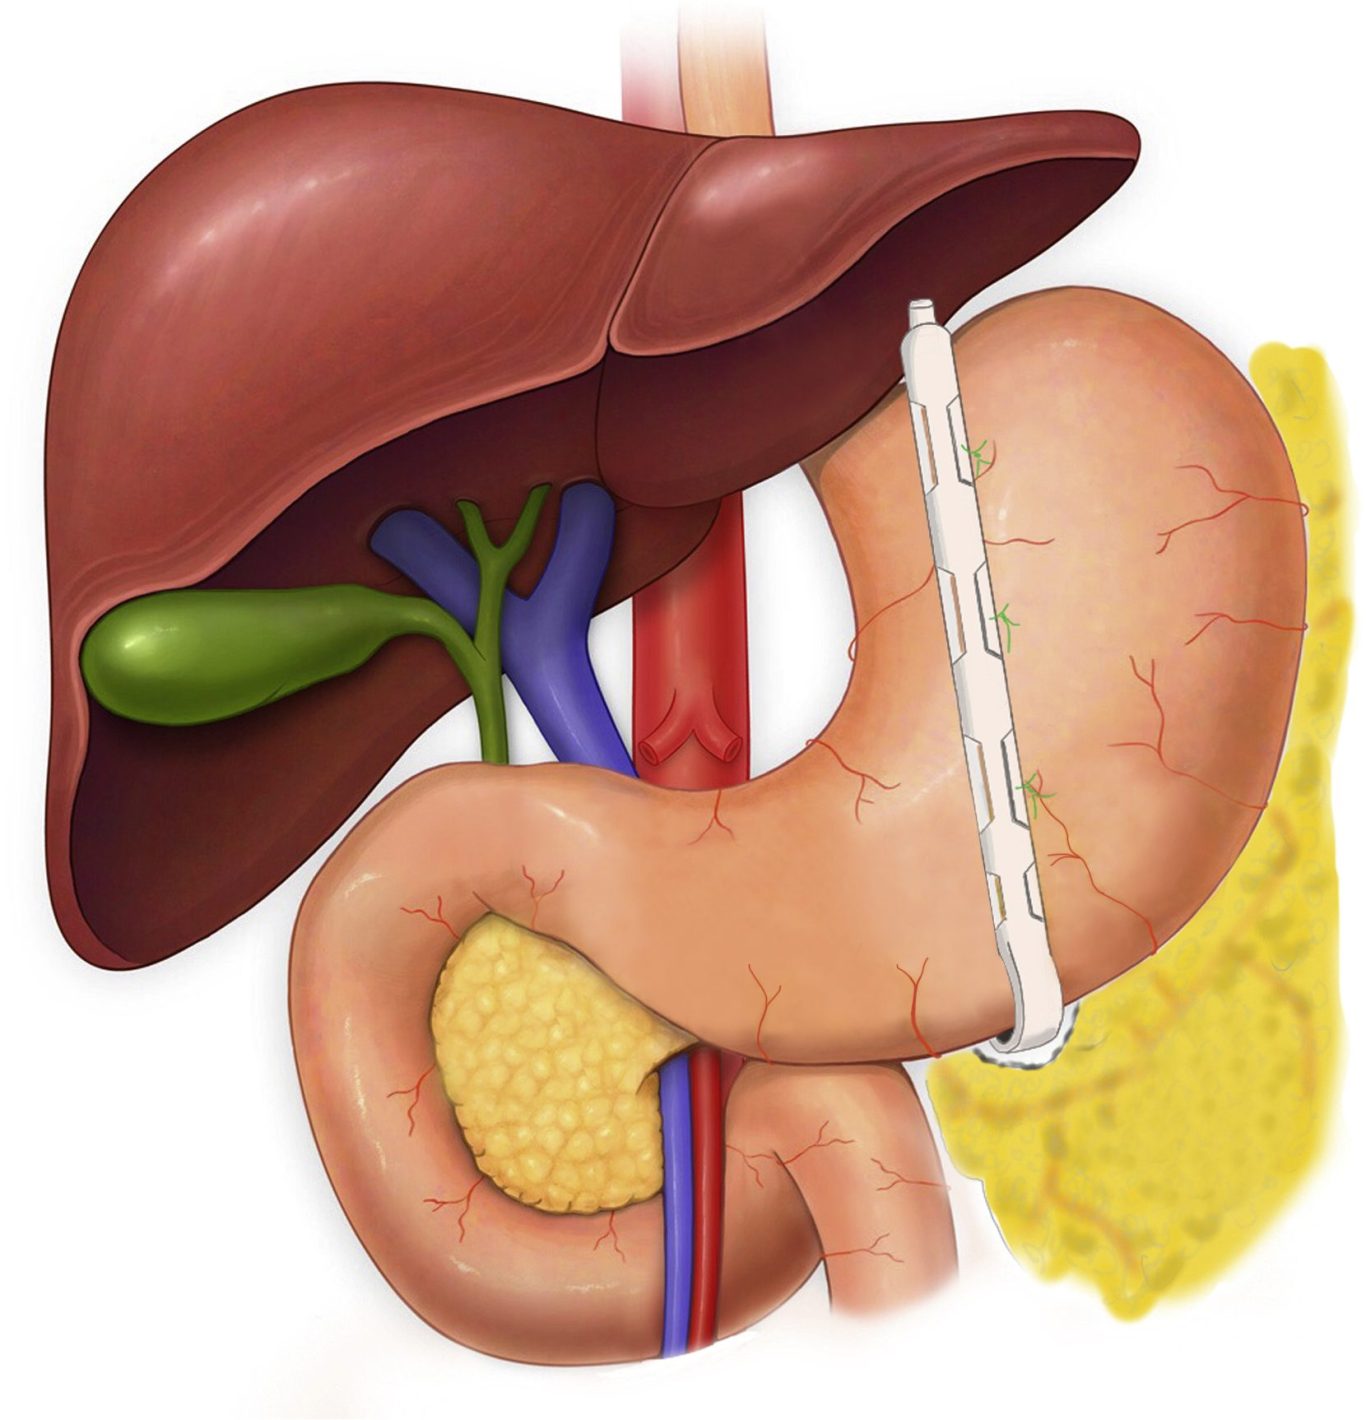 Stomach with BariClip